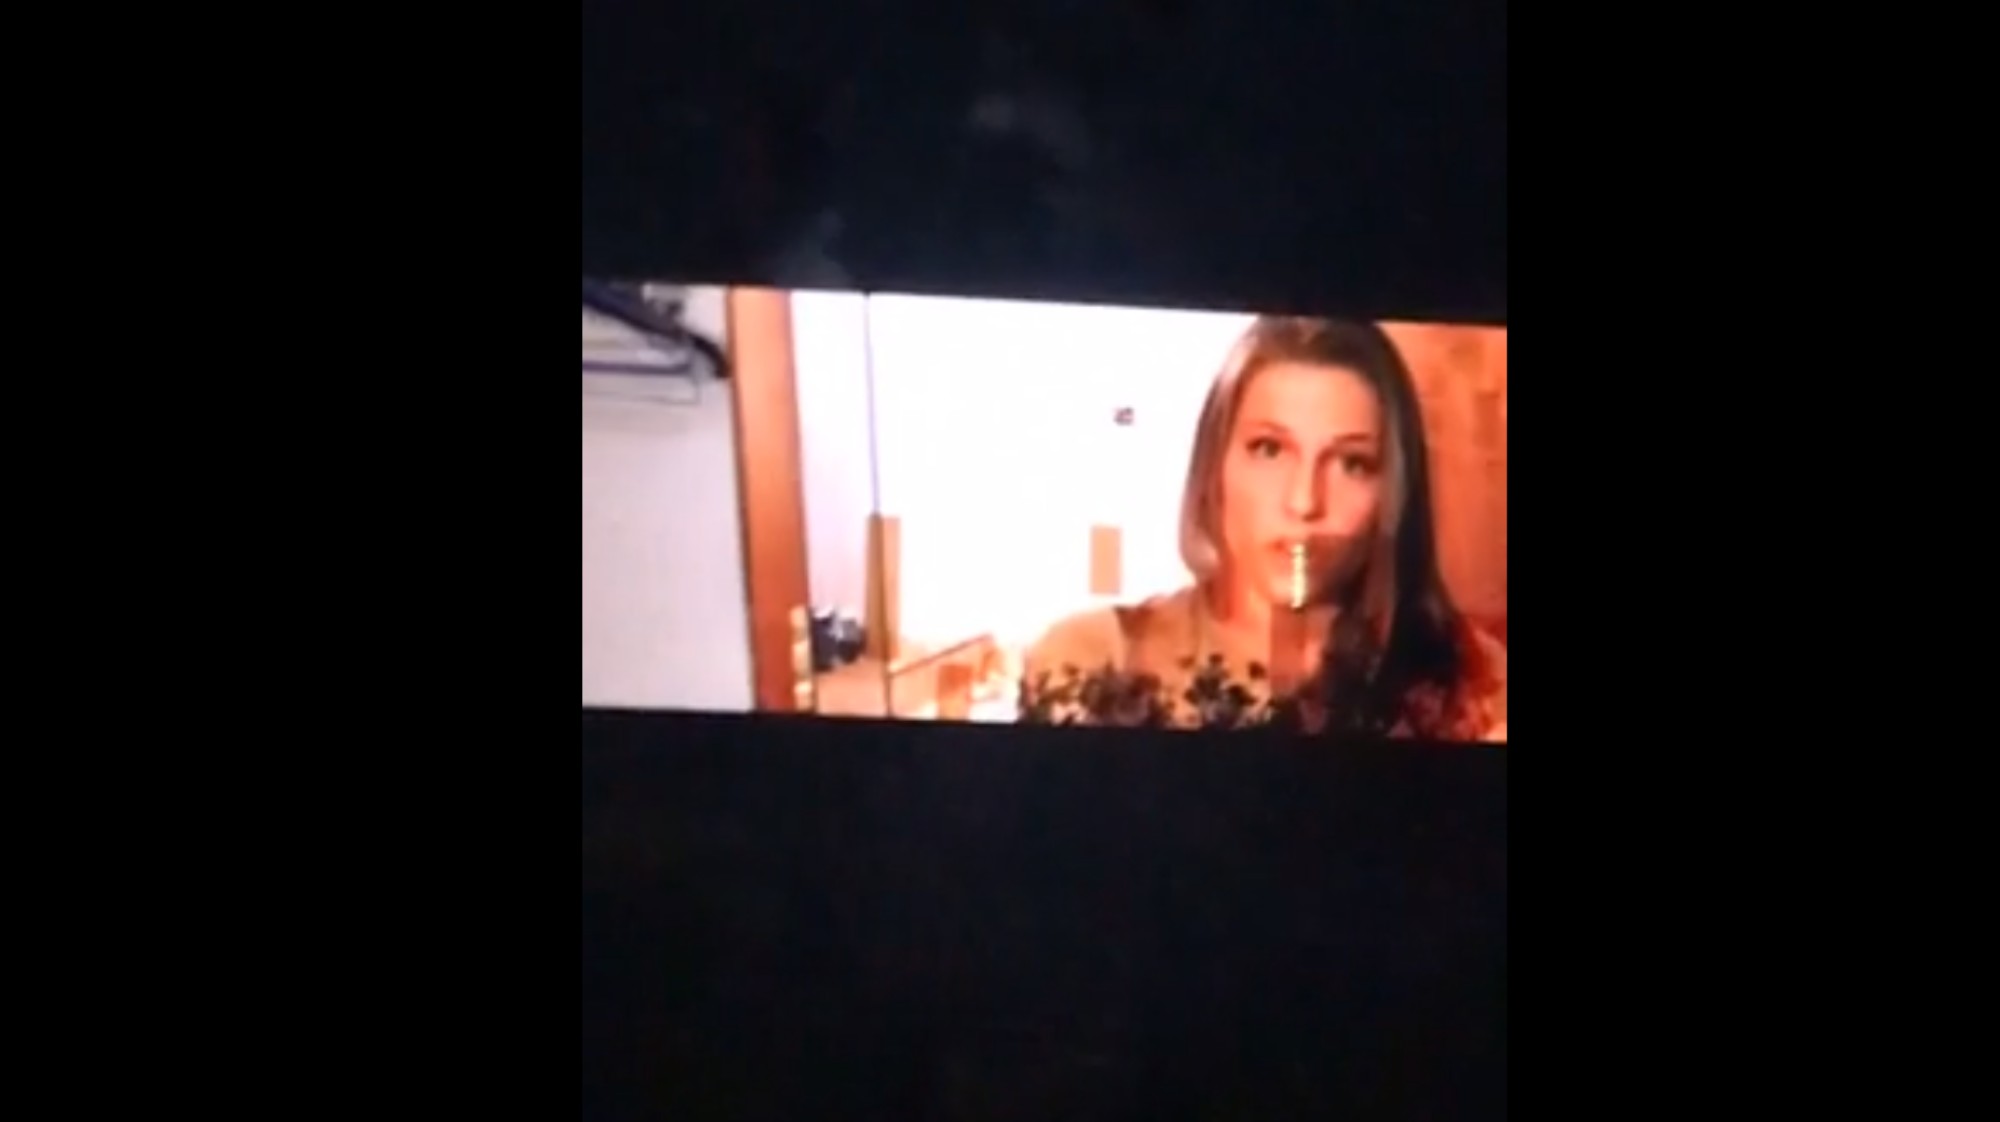 Blowjob Video Still - Threesome Blowjob Scene on Giant Highway Billboard Could ...